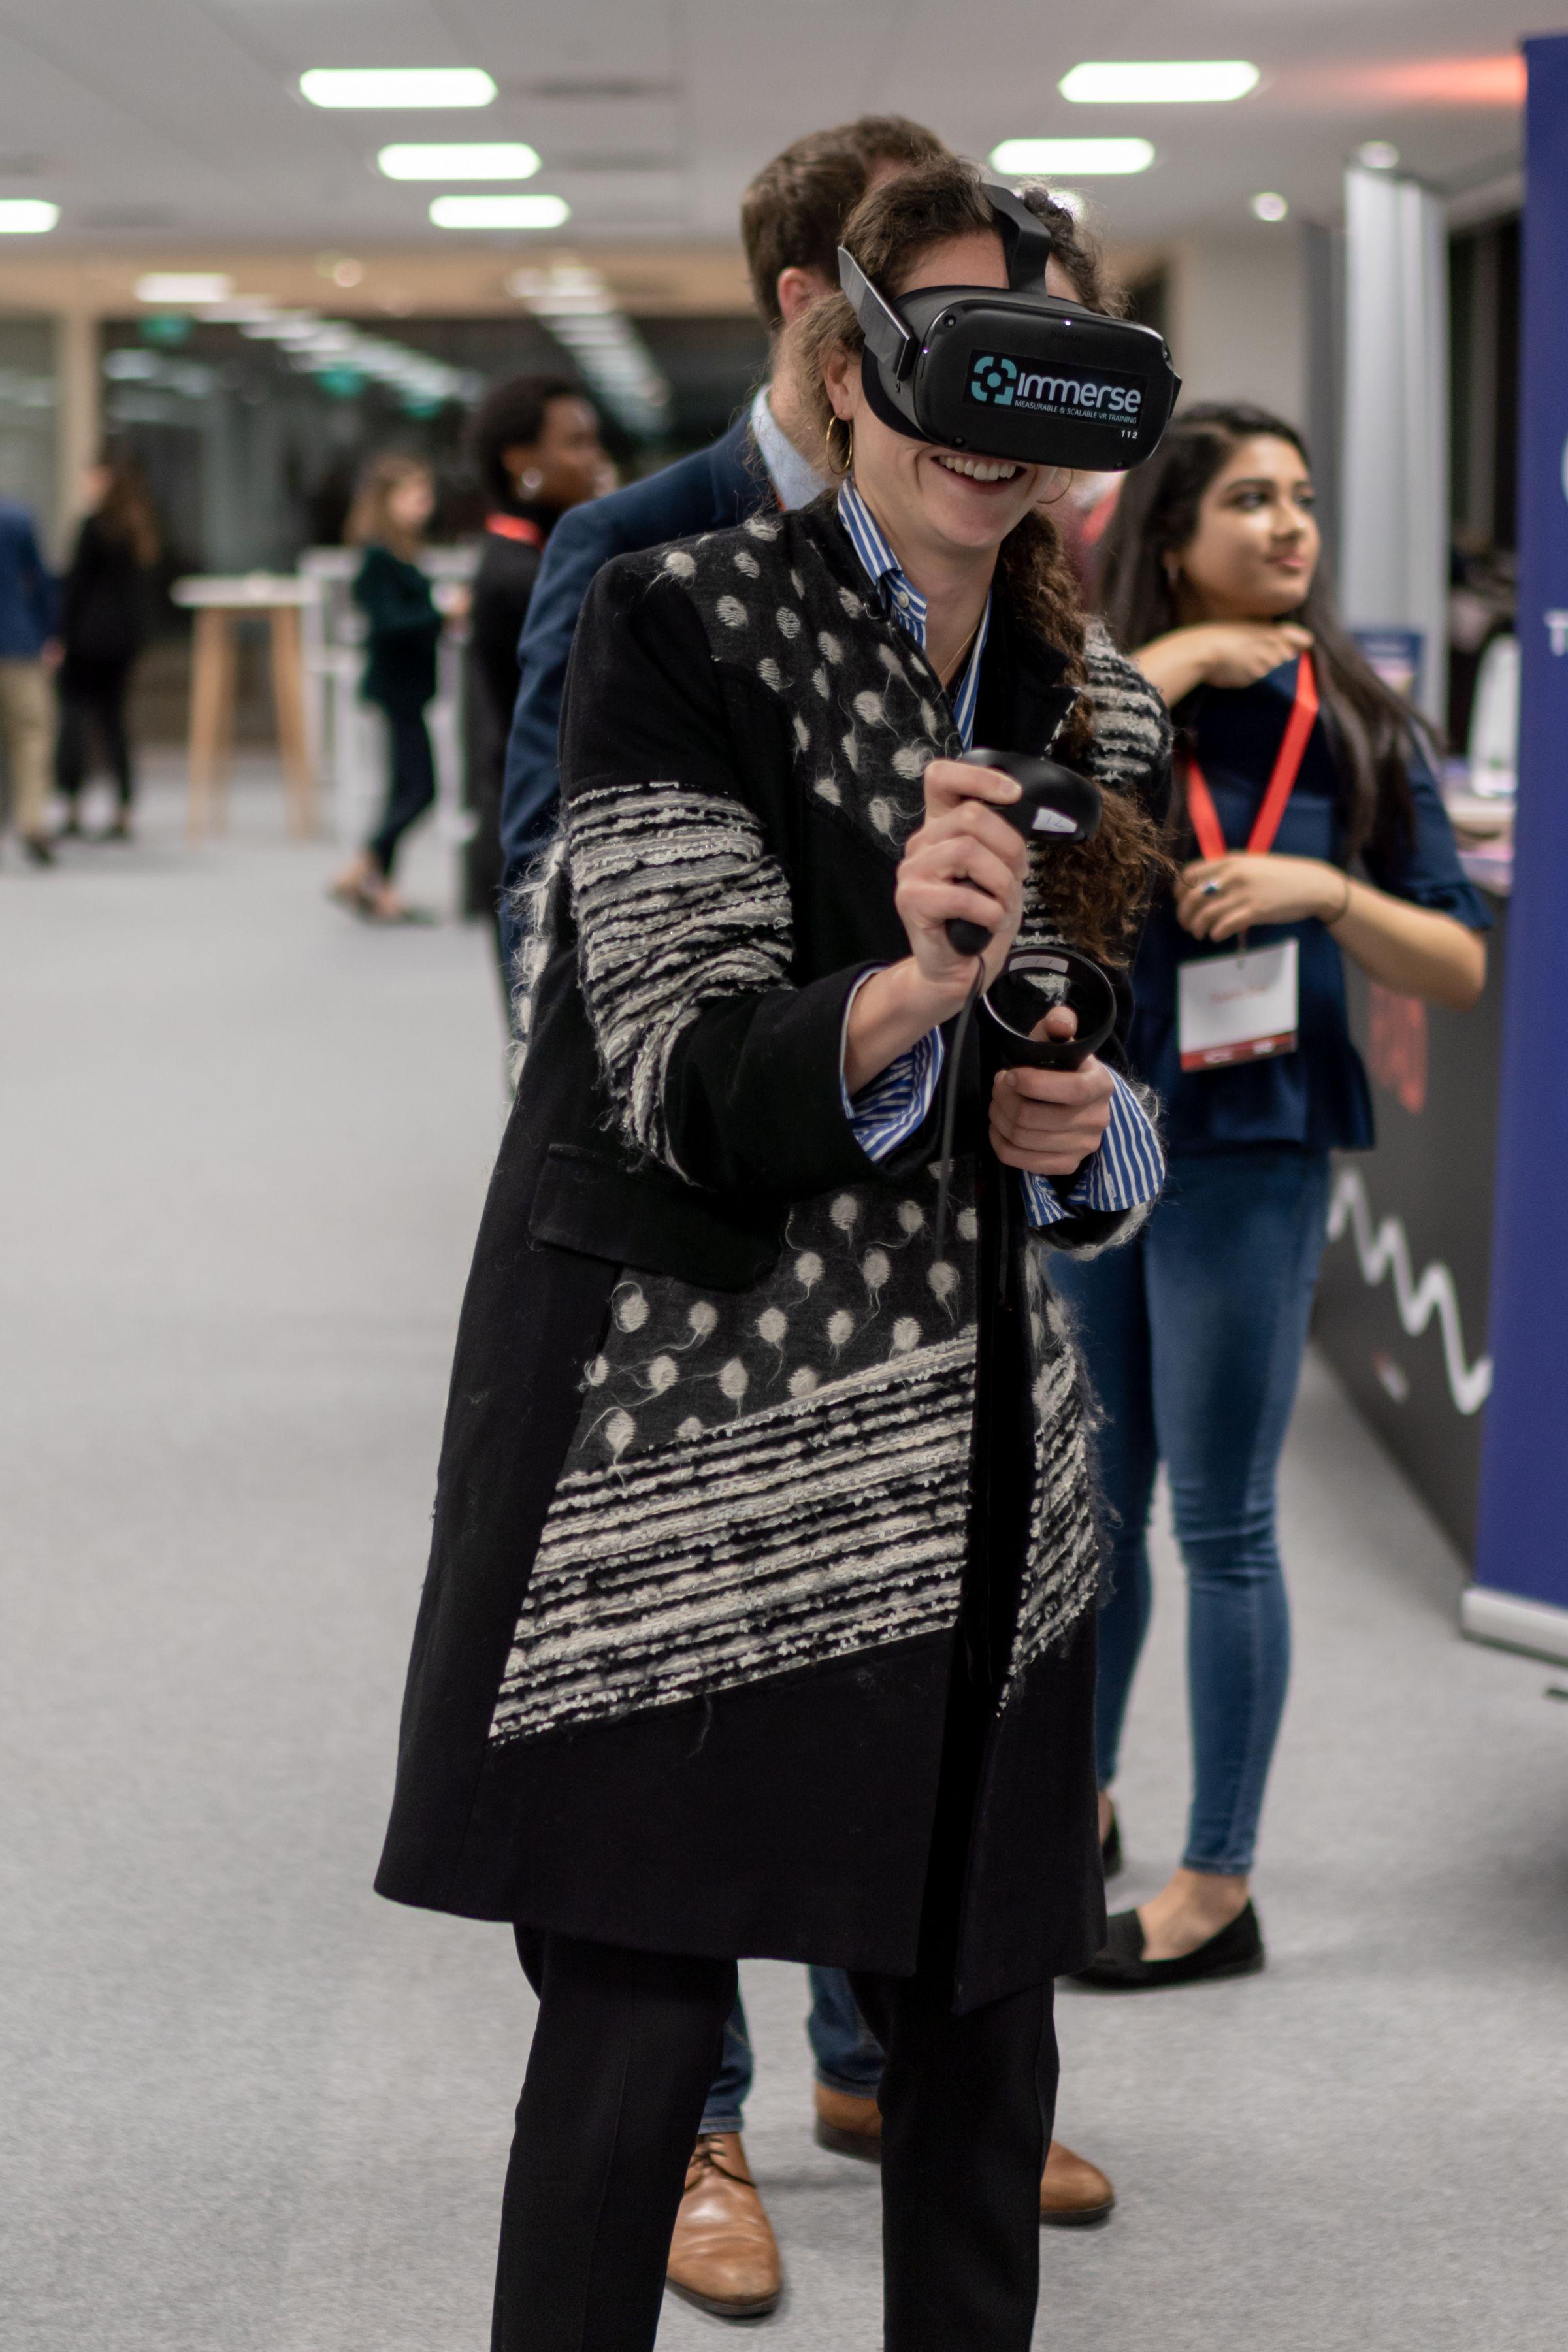 Woman using VR headset at ABP event day